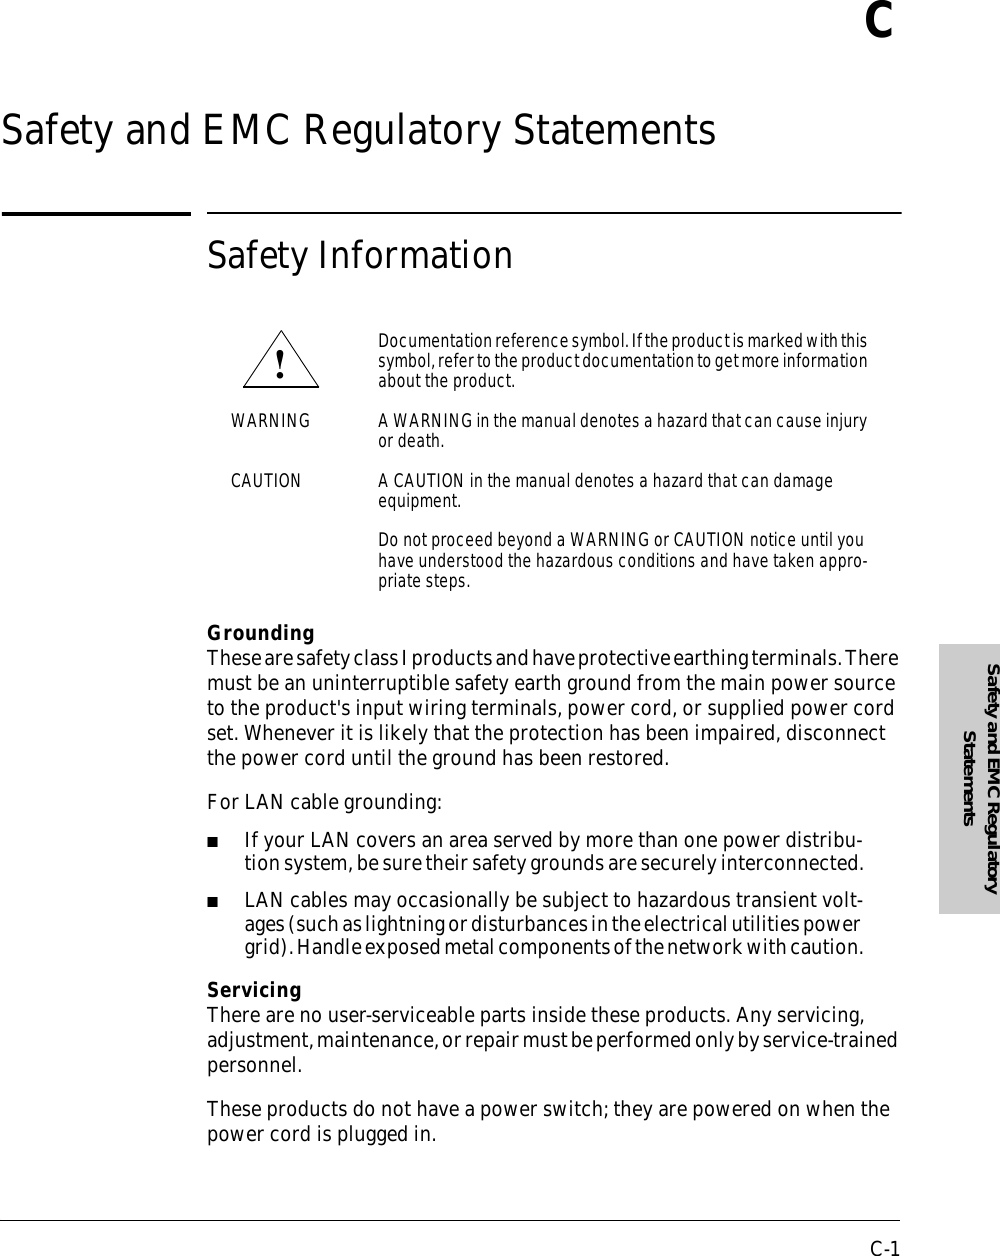 C-1Safety and EMC Regulatory StatementsCSafety and EMC Regulatory StatementsSafety InformationGroundingThese are safety class I products and have protective earthing terminals. There must be an uninterruptible safety earth ground from the main power source to the product&apos;s input wiring terminals, power cord, or supplied power cord set. Whenever it is likely that the protection has been impaired, disconnect the power cord until the ground has been restored.For LAN cable grounding:■If your LAN covers an area served by more than one power distribu-tion system, be sure their safety grounds are securely interconnected.■LAN cables may occasionally be subject to hazardous transient volt-ages (such as lightning or disturbances in the electrical utilities power grid). Handle exposed metal components of the network with caution.ServicingThere are no user-serviceable parts inside these products. Any servicing, adjustment, maintenance, or repair must be performed only by service-trained personnel.These products do not have a power switch; they are powered on when the power cord is plugged in.Documentation reference symbol. If the product is marked with this symbol, refer to the product documentation to get more information about the product.WARNING A WARNING in the manual denotes a hazard that can cause injury or death.CAUTION A CAUTION in the manual denotes a hazard that can damage equipment.Do not proceed beyond a WARNING or CAUTION notice until you have understood the hazardous conditions and have taken appro-priate steps.!